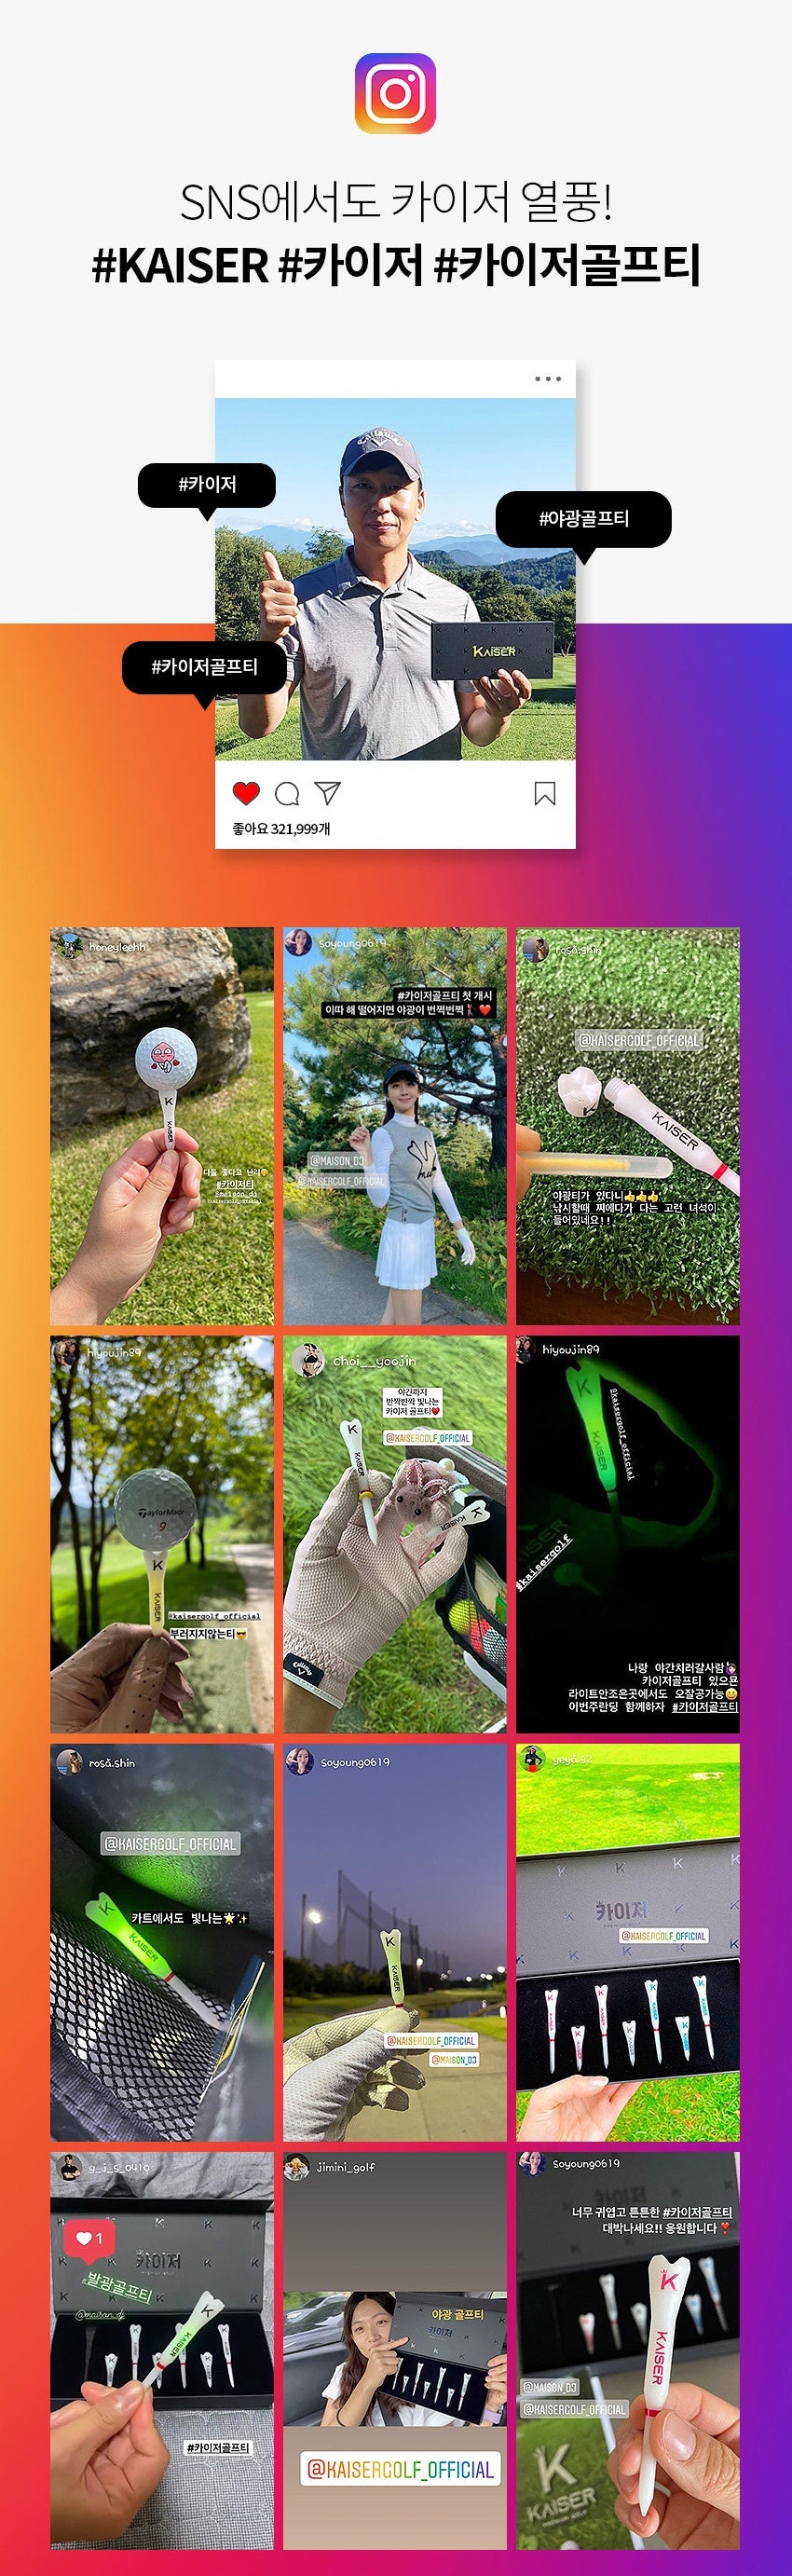 KAISER T2 Golf Tees Day Night Gifts Accessory Sets/ Long 2pcs+Short 1pcs/ distance increase luminous anti-slicing Height fix Holders Glow in Dark Light up Flashing Made in Korea